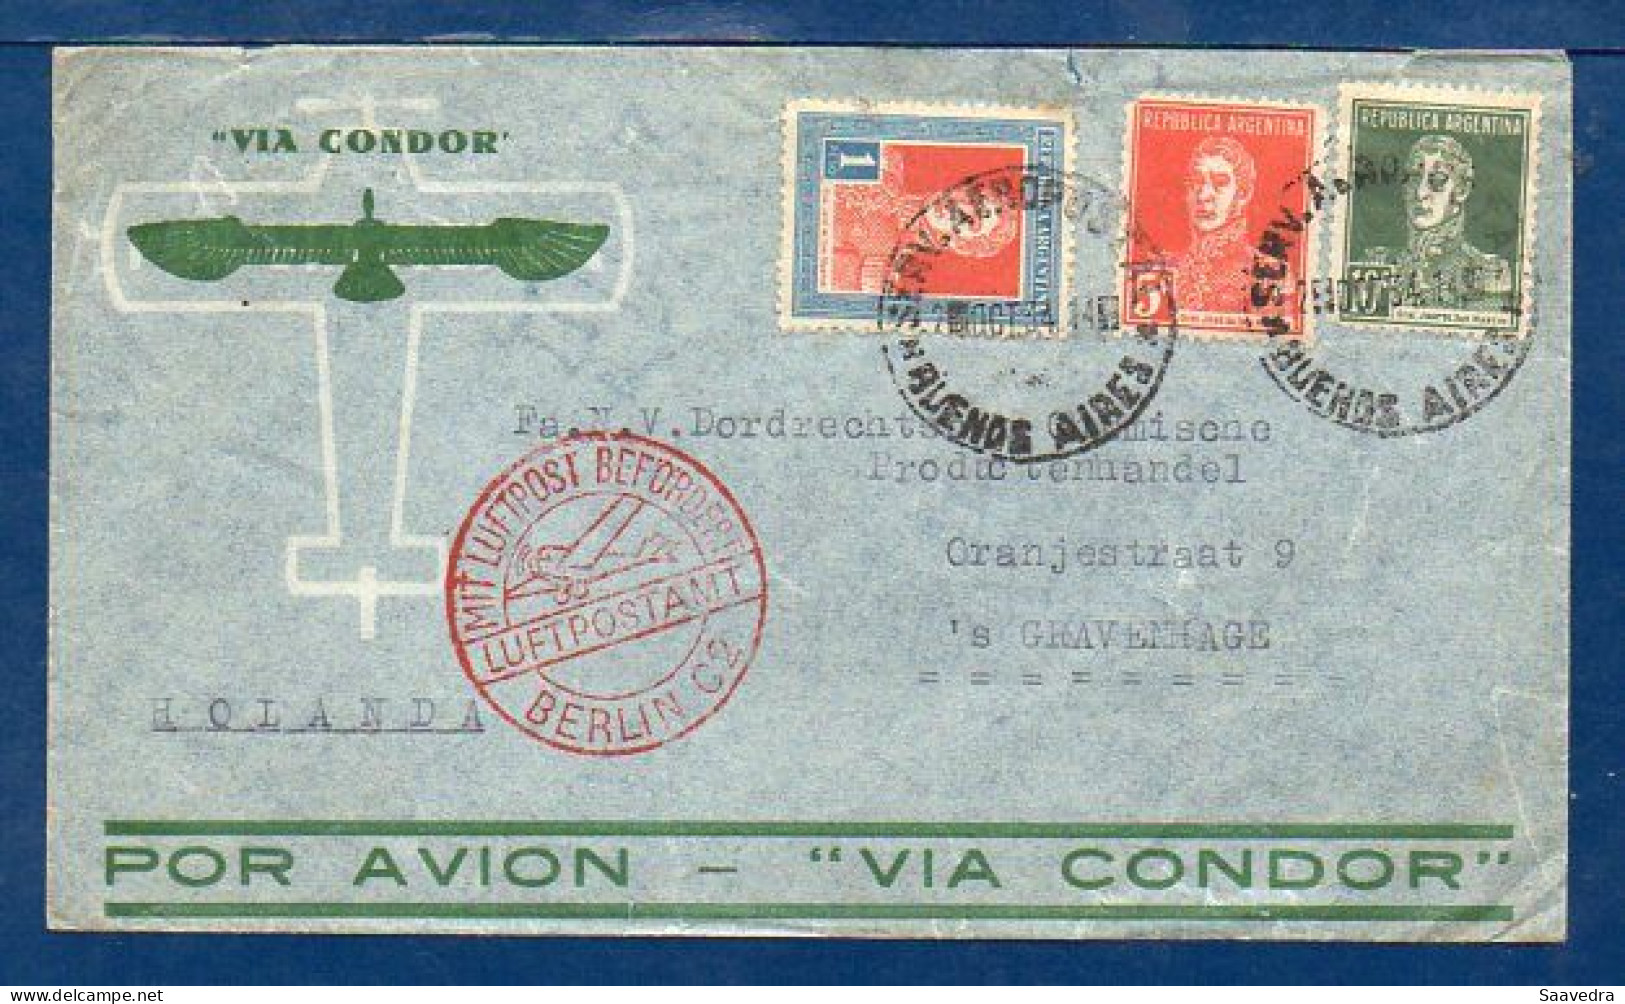 Argentina To Netherland, 1935, Via ZEPPELIN Flight G-409, SEE DESCRIPTION   (050) - Covers & Documents